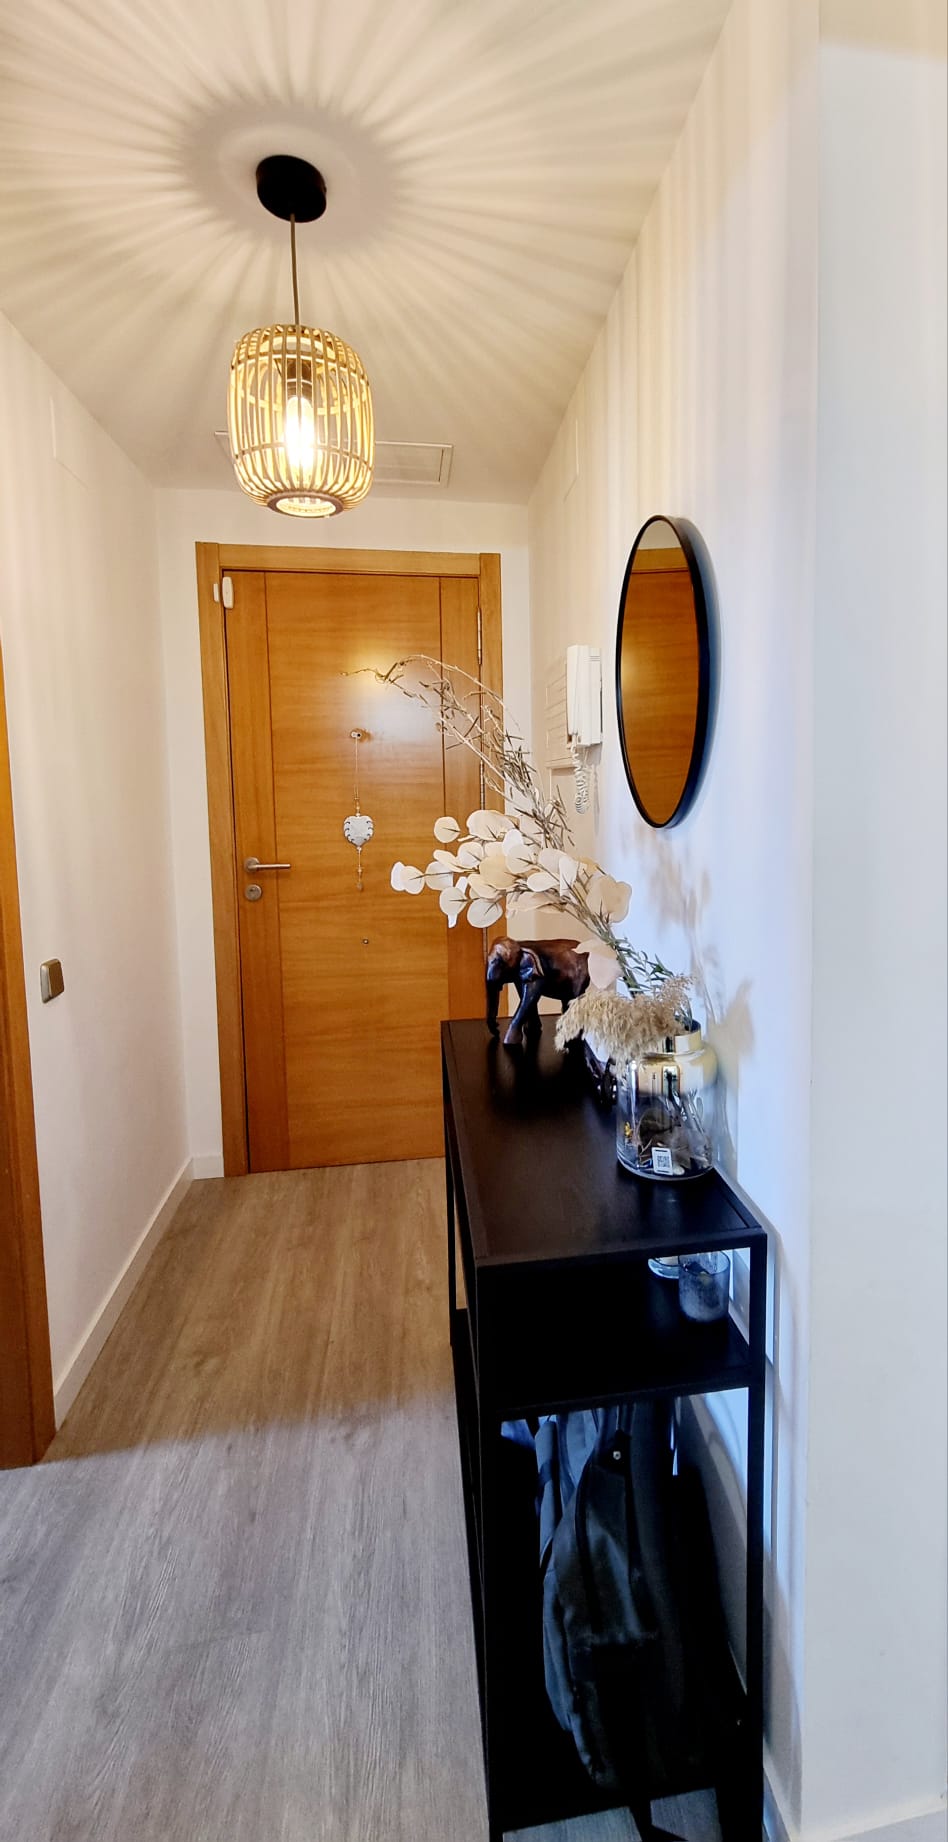 Duplex apartment for personal residence/investment